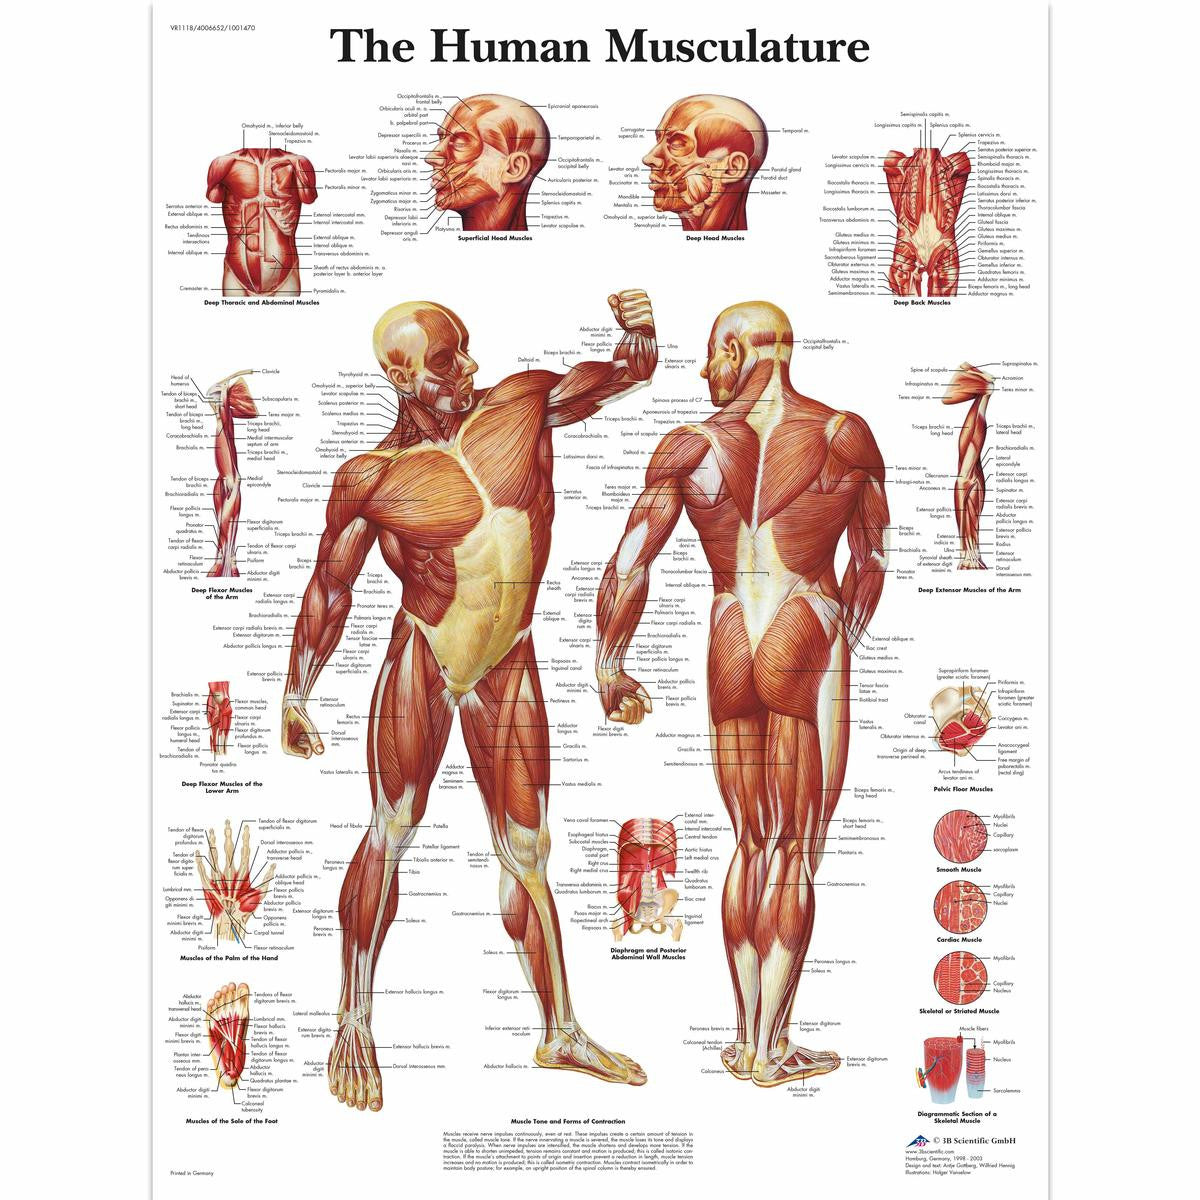 The Muscular System chart